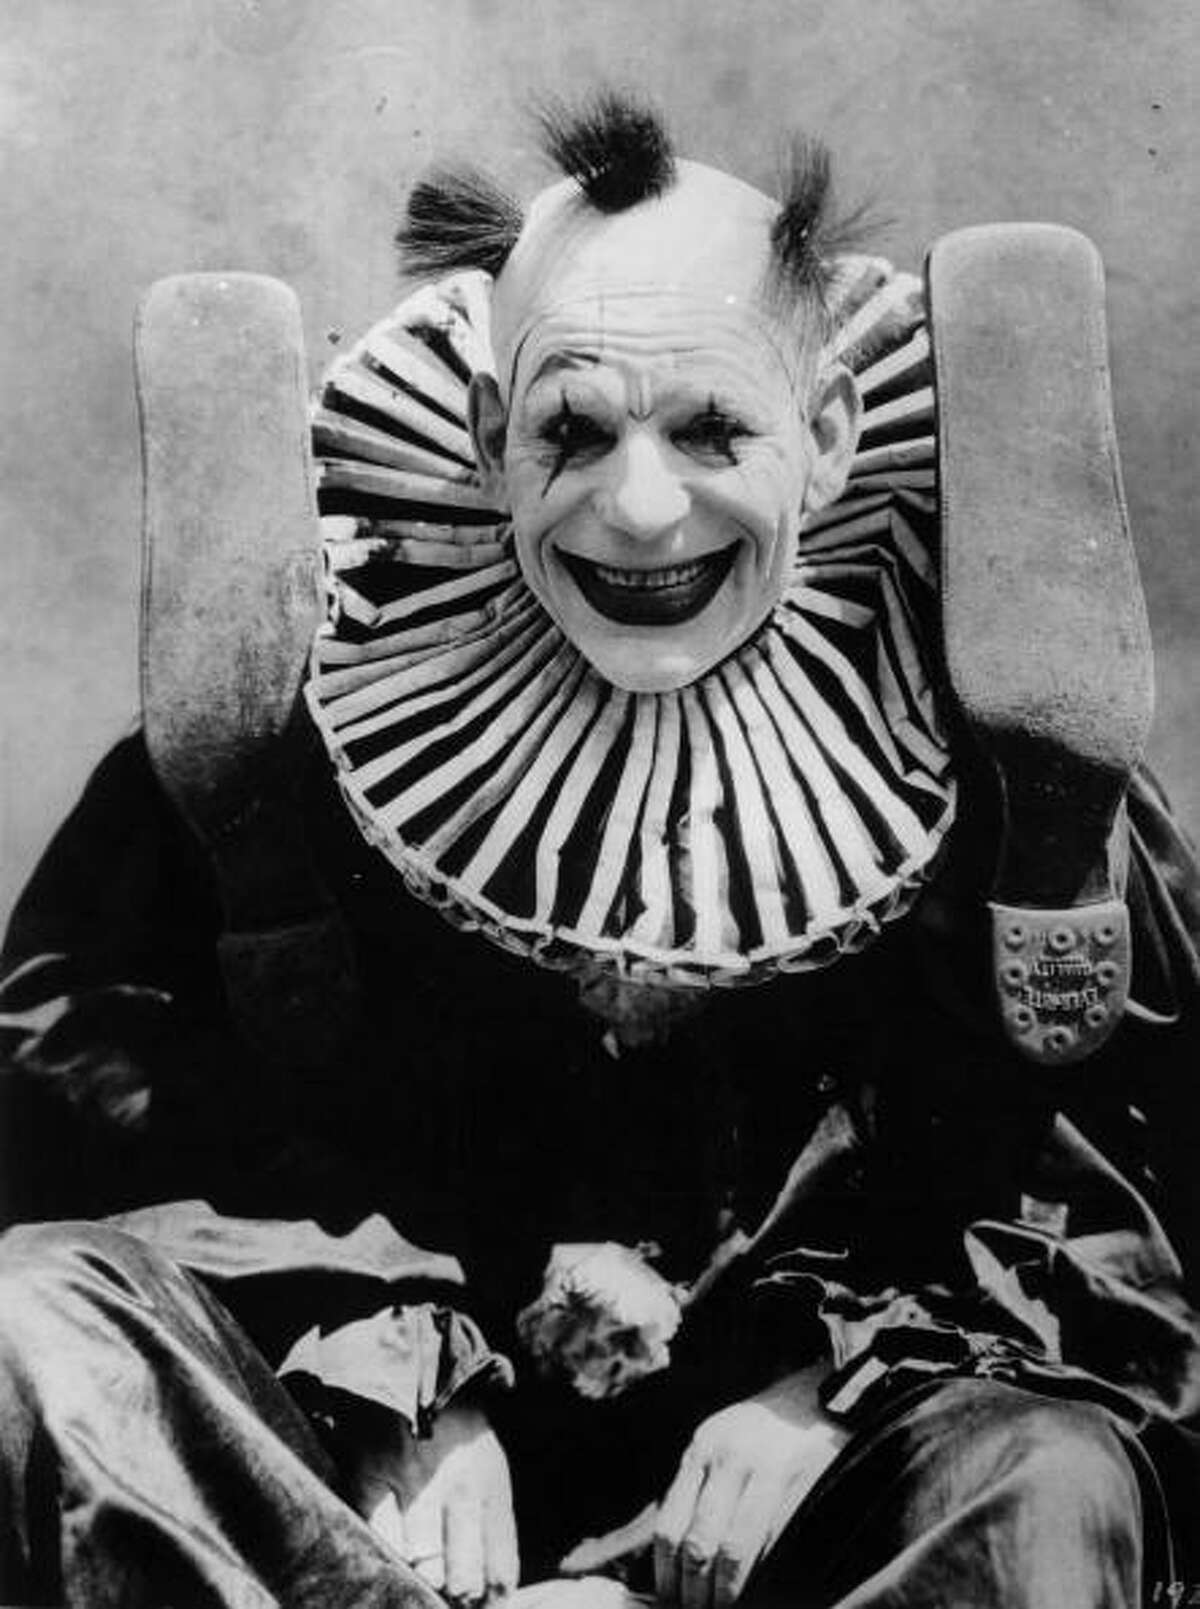 American actor Lon Chaney is seen dressed as a clown in 1924 for his role in the film "He Who Gets Slapped." How about "He Who ... NO, Just No."